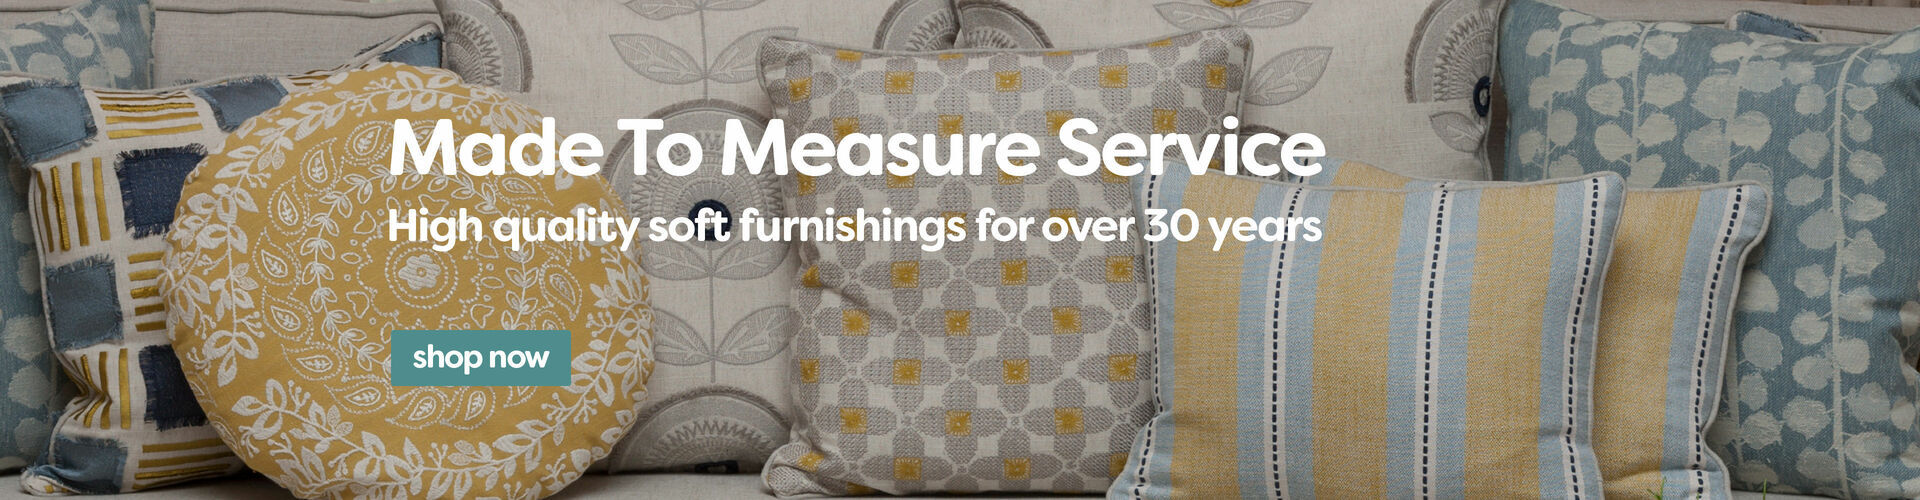 Made To Measure Service